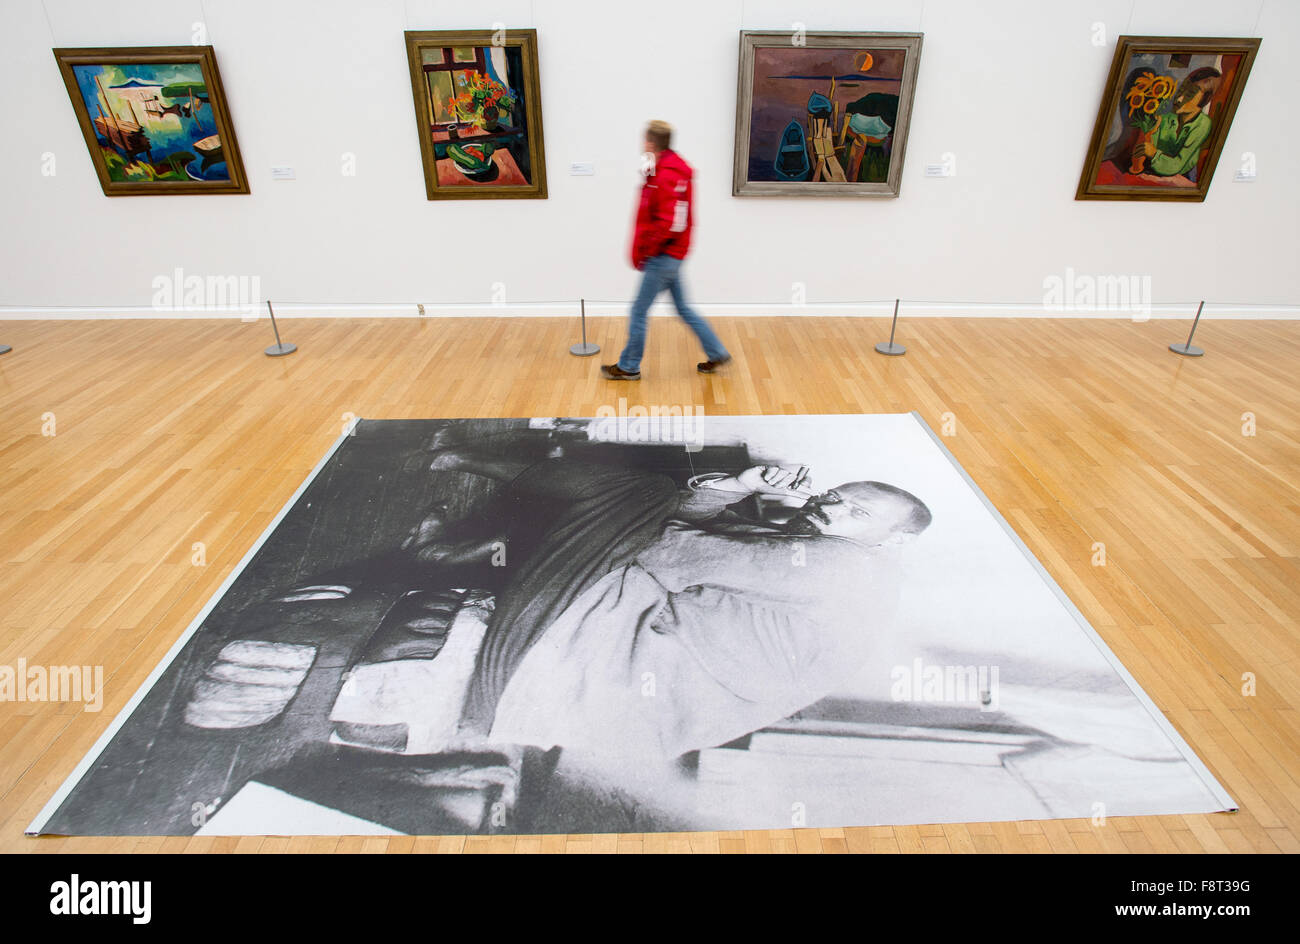 Chemnitz, Germany. 11th Dec, 2015. A man looks at a painting from the artist Karl Schmidt-Rottluff (1884-1976) at the exhibition 'Karl Schmidt-Rottluff - 490 works in the Kunstsammlungen Chemnitz' in Chemnitz, Germany, 11 December 2015. On the ground a blown up black and white photo of the artist can be seen. Works by the artist will be on show from 13 December 2015 until 10 April 2016. Photo: PETER ENDIG/DPA/Alamy Live News Stock Photo